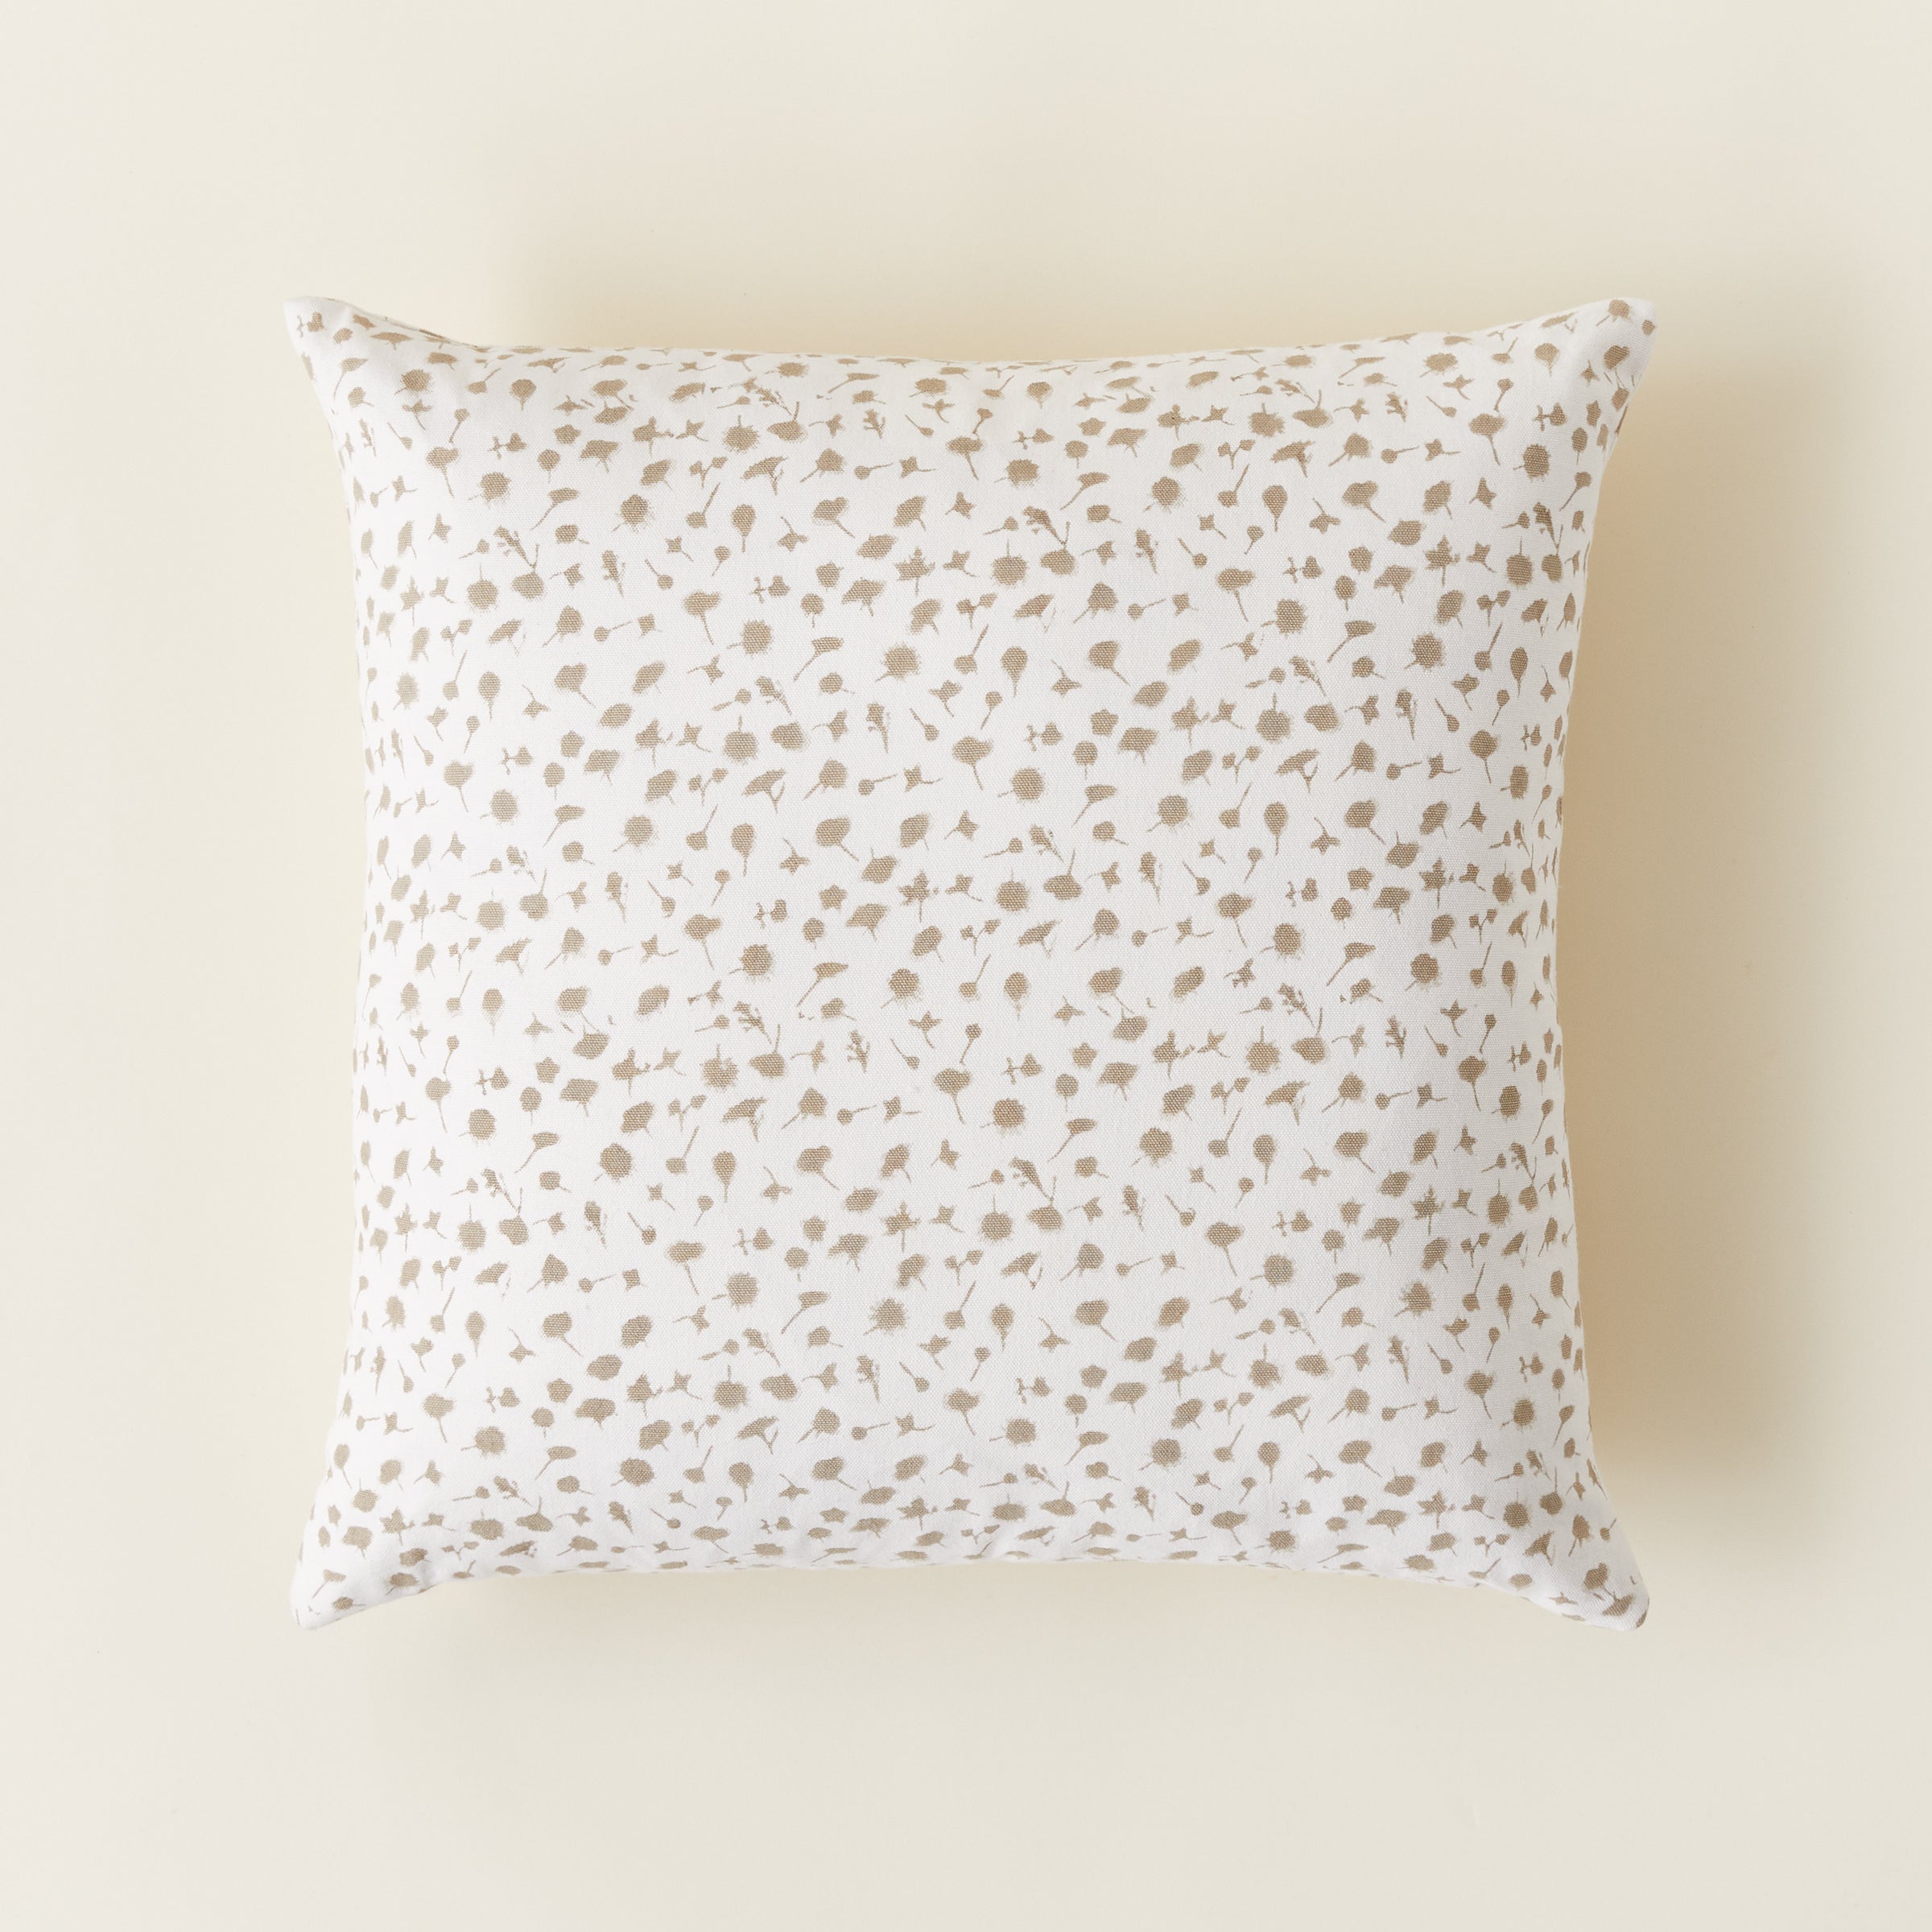 KMH x Ginger Sparrow -  Floral Pillow Cover 1